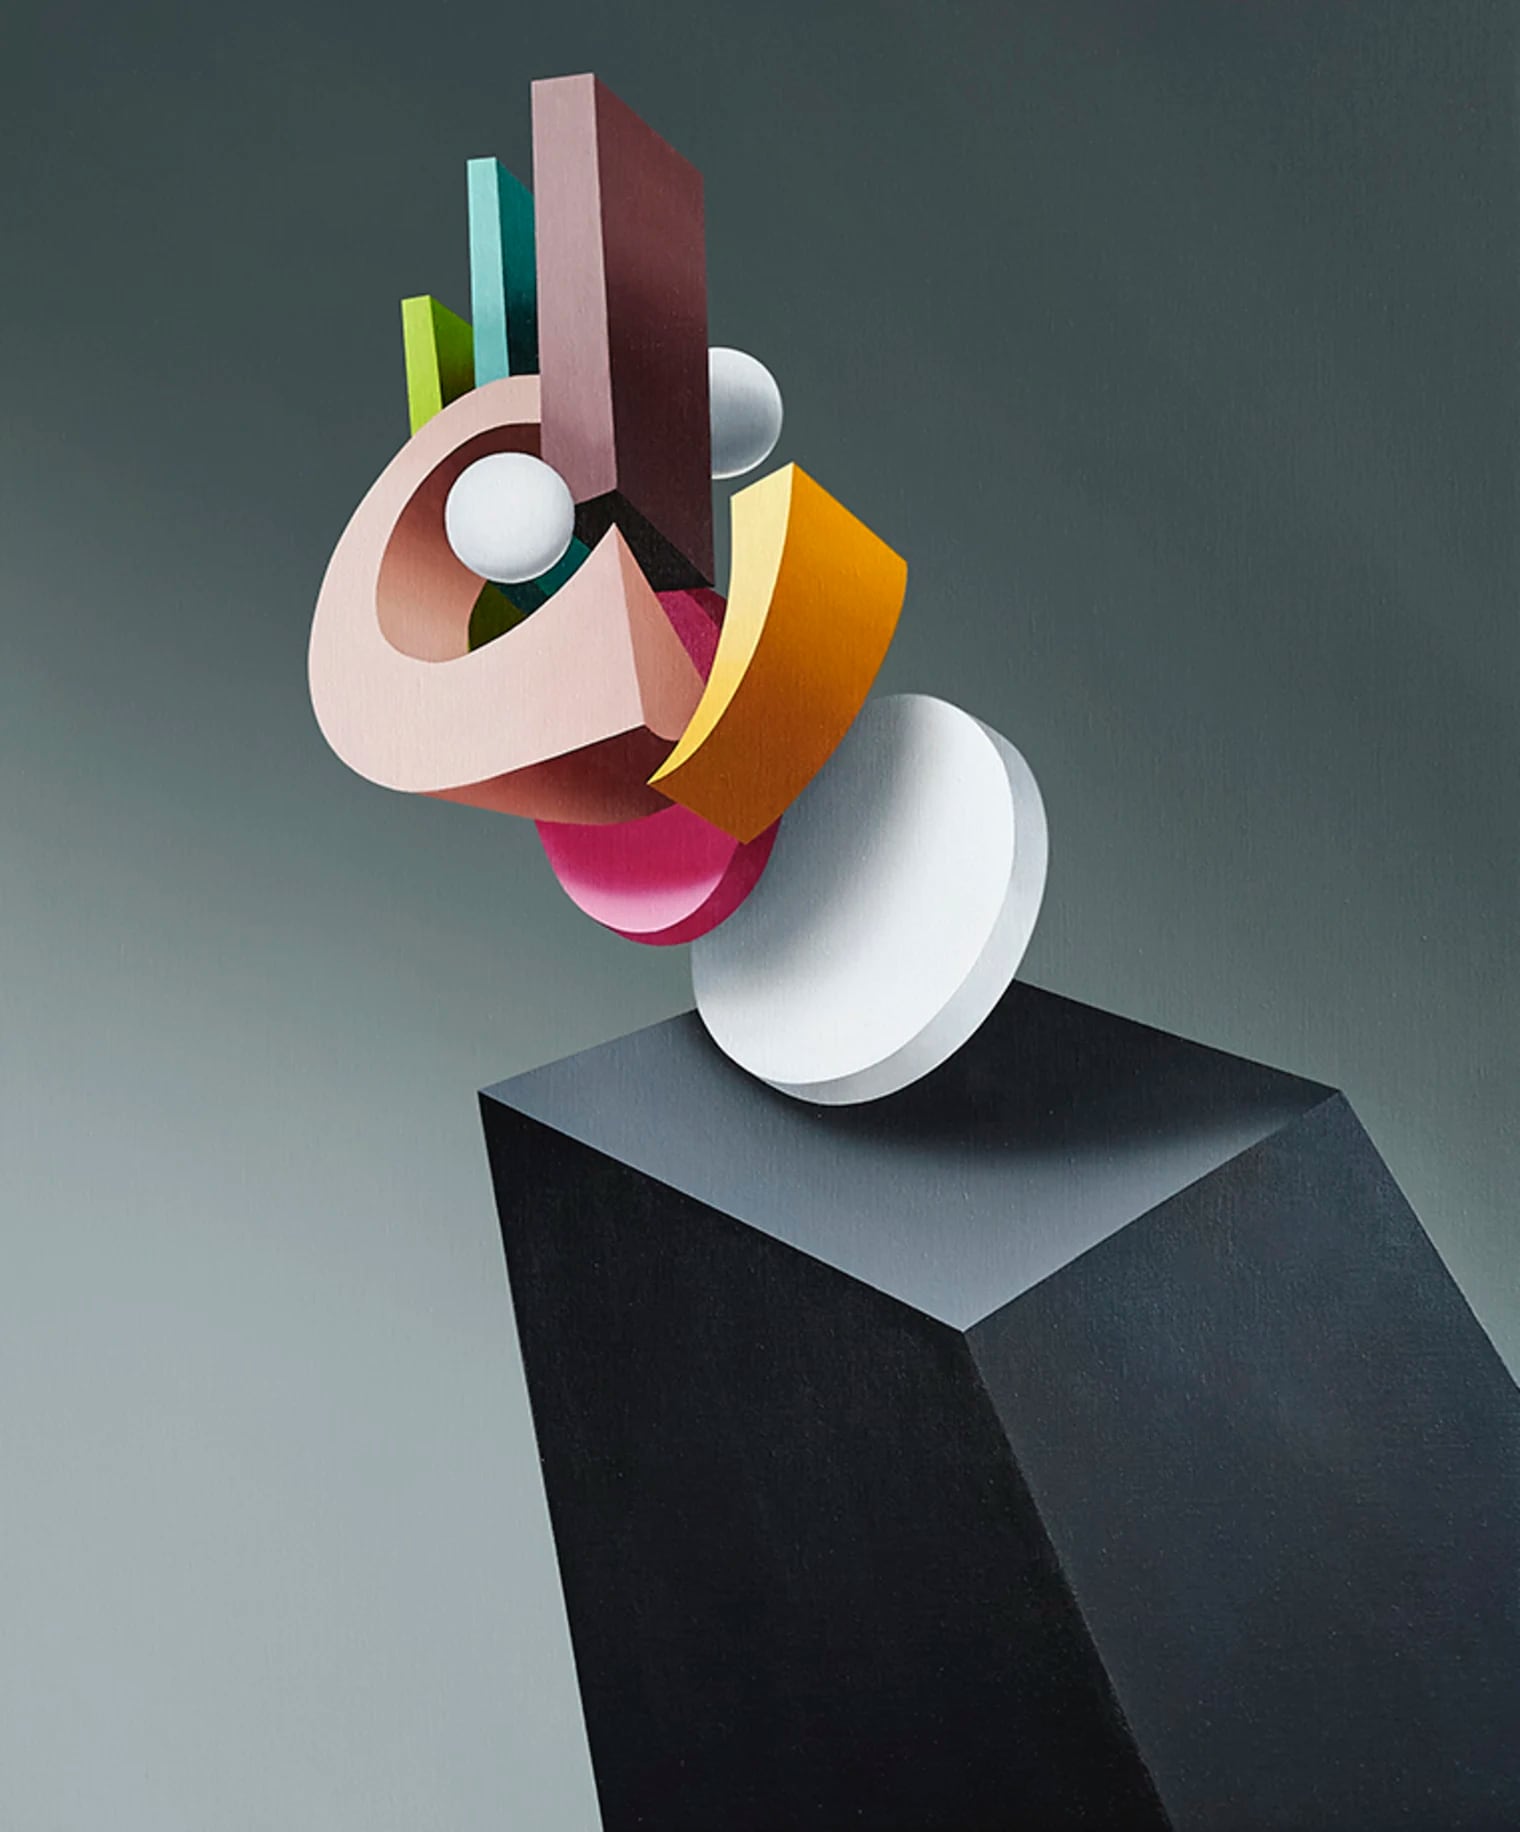 a cubist portrait composed with geometric color blocked shapes